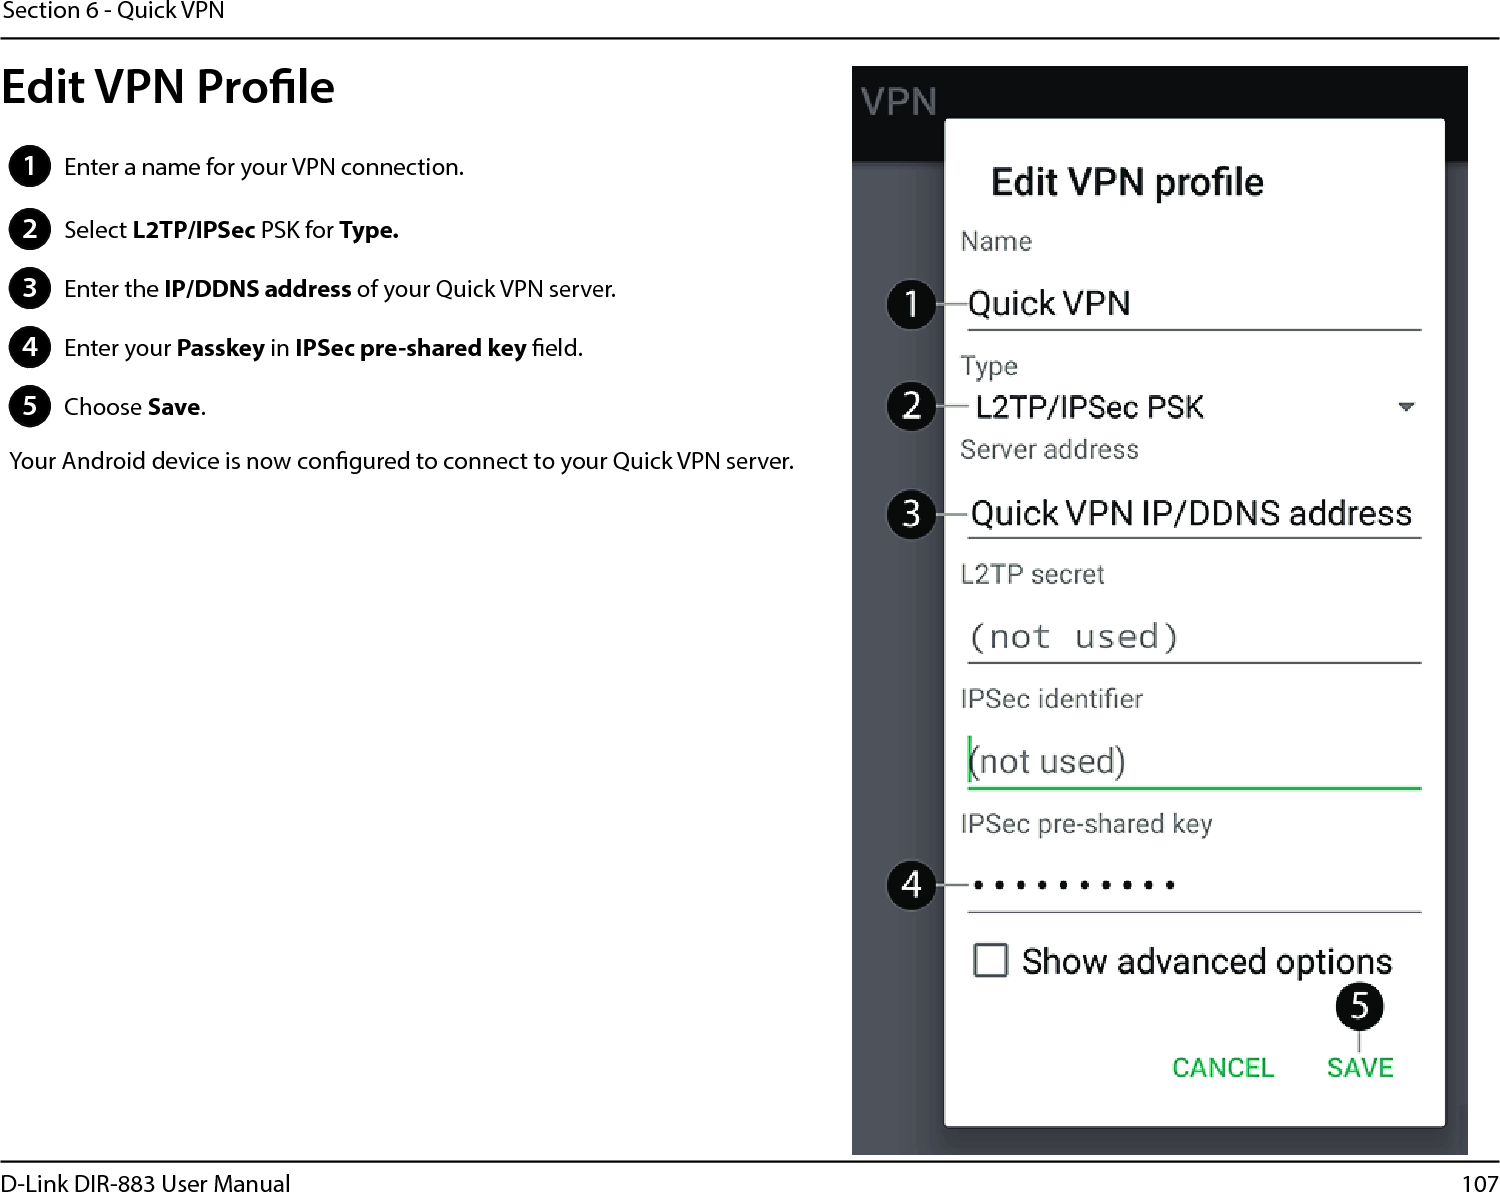 107D-Link DIR-883 User ManualSection 6 - Quick VPN1Enter a name for your VPN connection.2Select L2TP/IPSec PSK for Type.3Enter the IP/DDNS address of your Quick VPN server.4Enter your Passkey in IPSec pre-shared key eld.5Choose Save.Your Android device is now congured to connect to your Quick VPN server.Edit VPN Prole